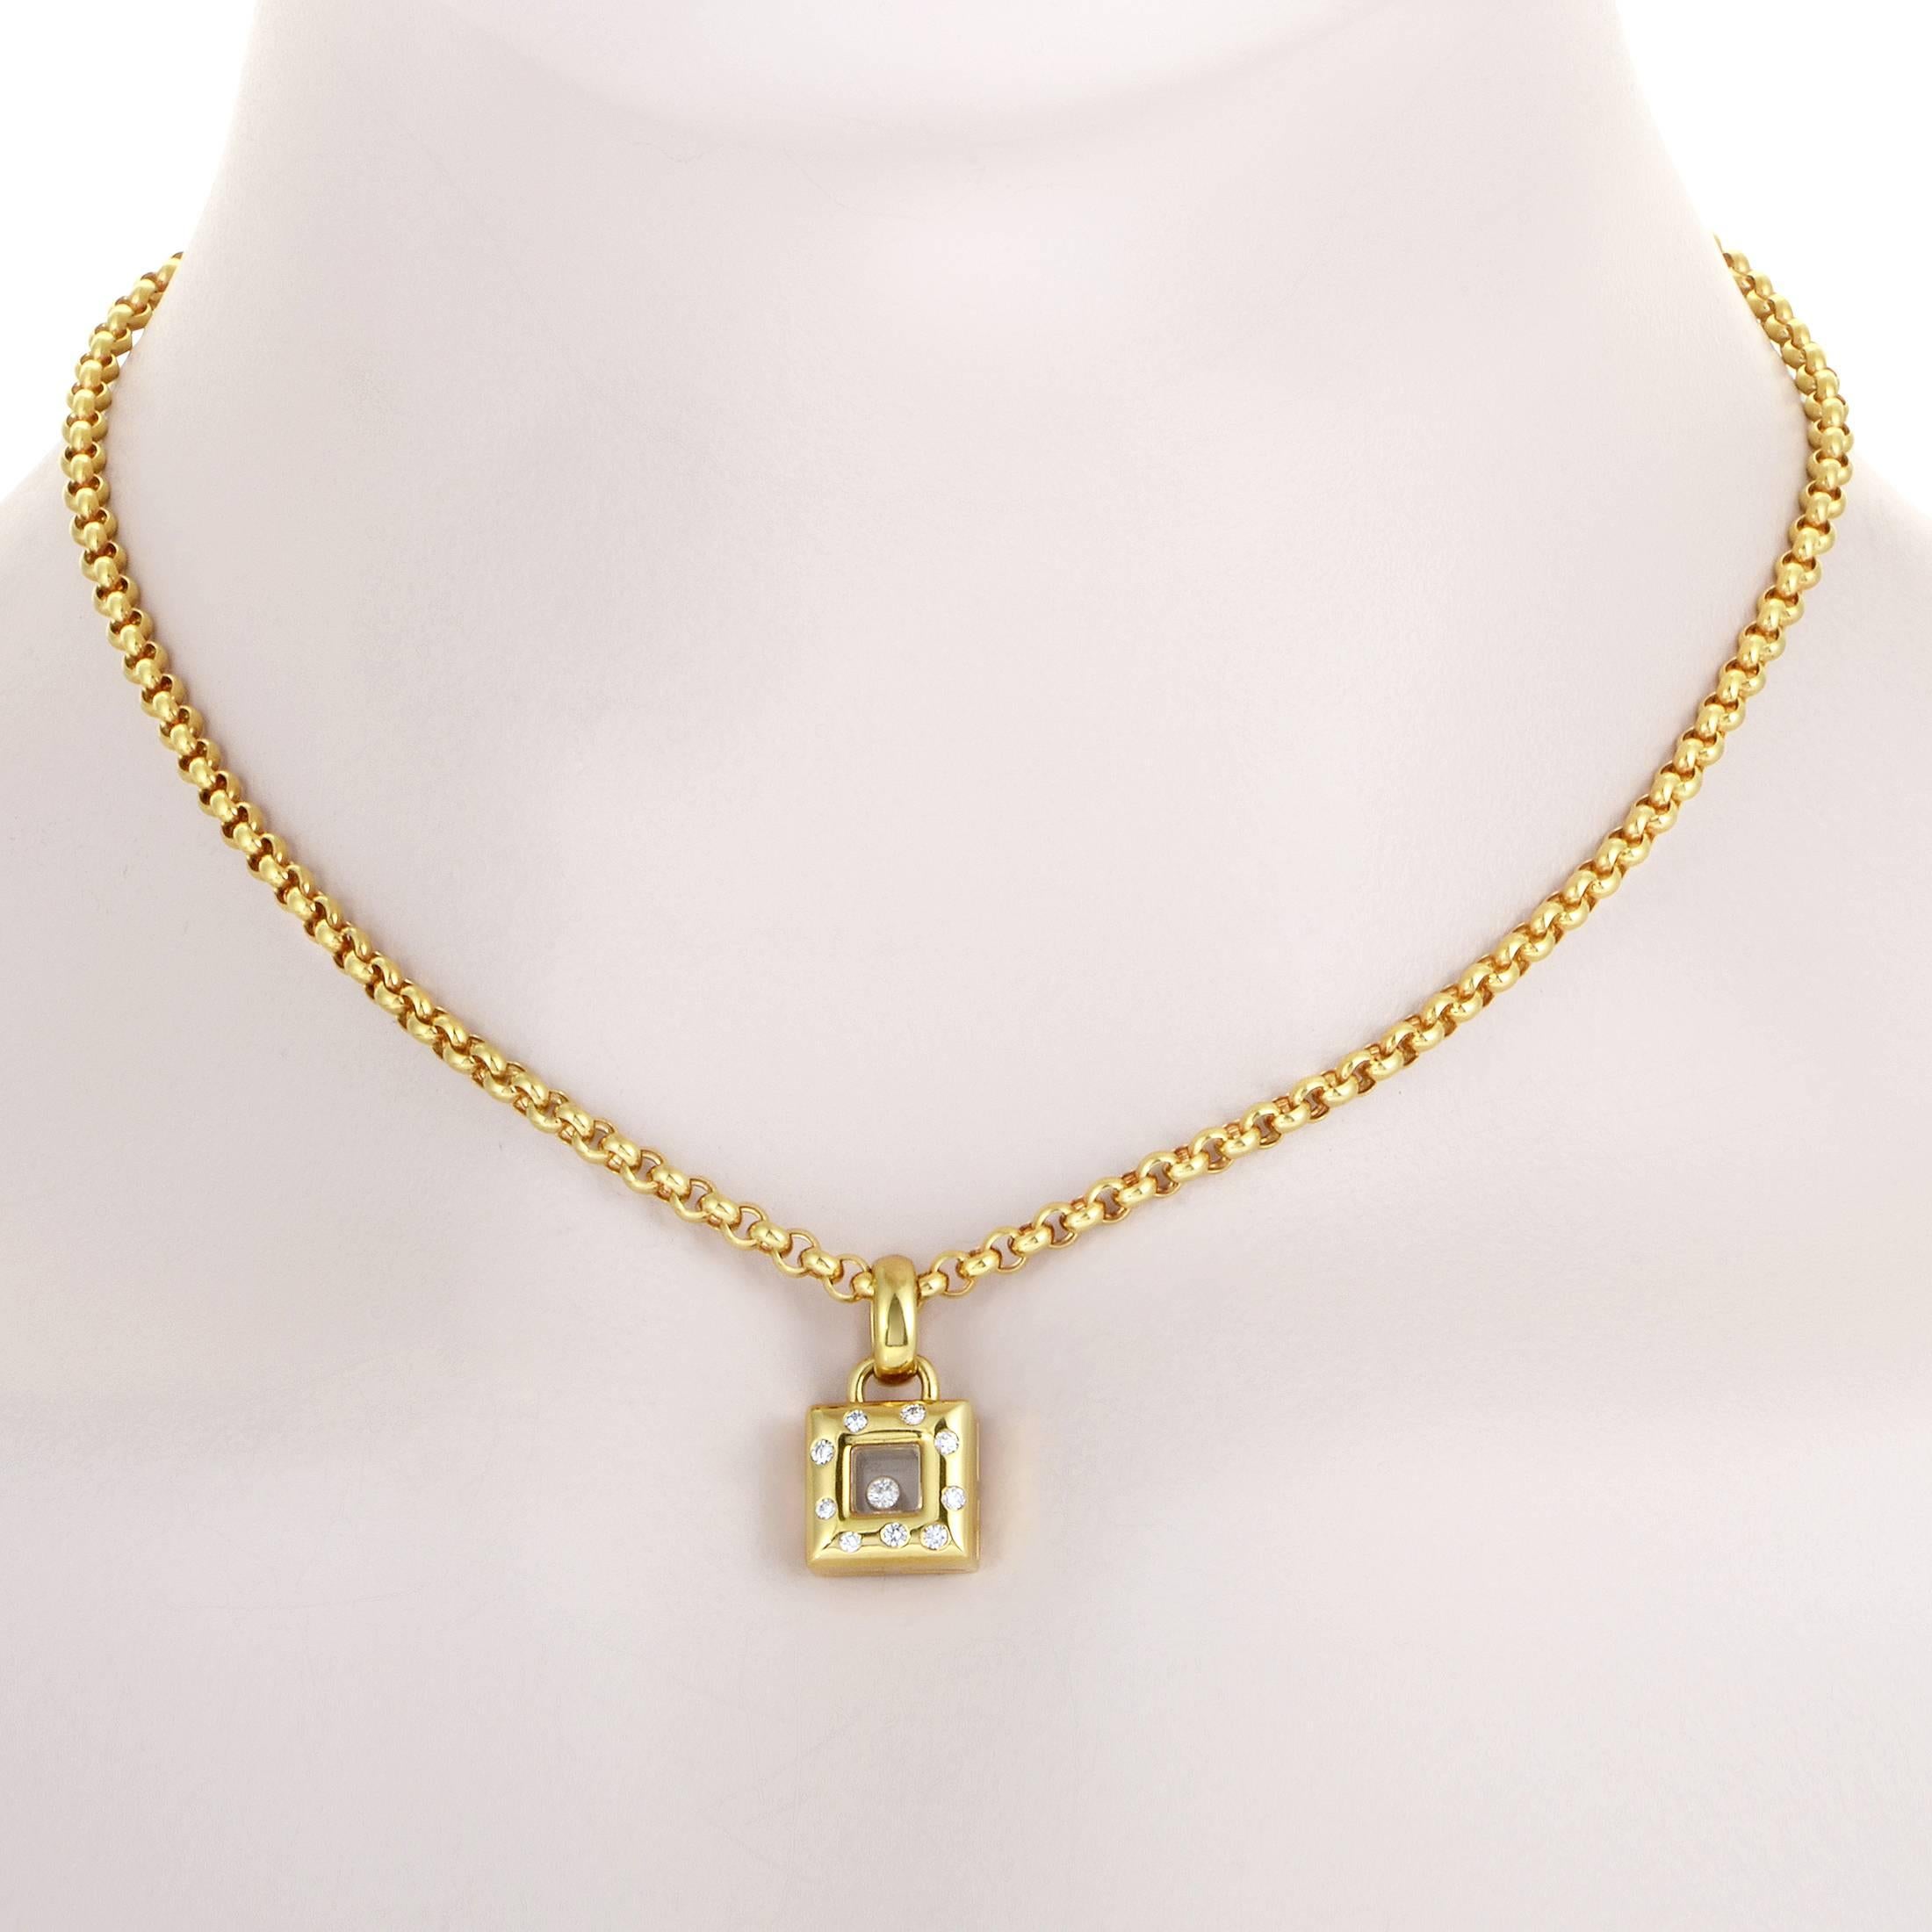 Boasting the fascinating floating diamond that has become an esteemed stand-out feature of the brand's highly revered creations, this stunning 18K yellow gold necklace from Chopard is also adorned with sparkling diamonds along the smooth surface of